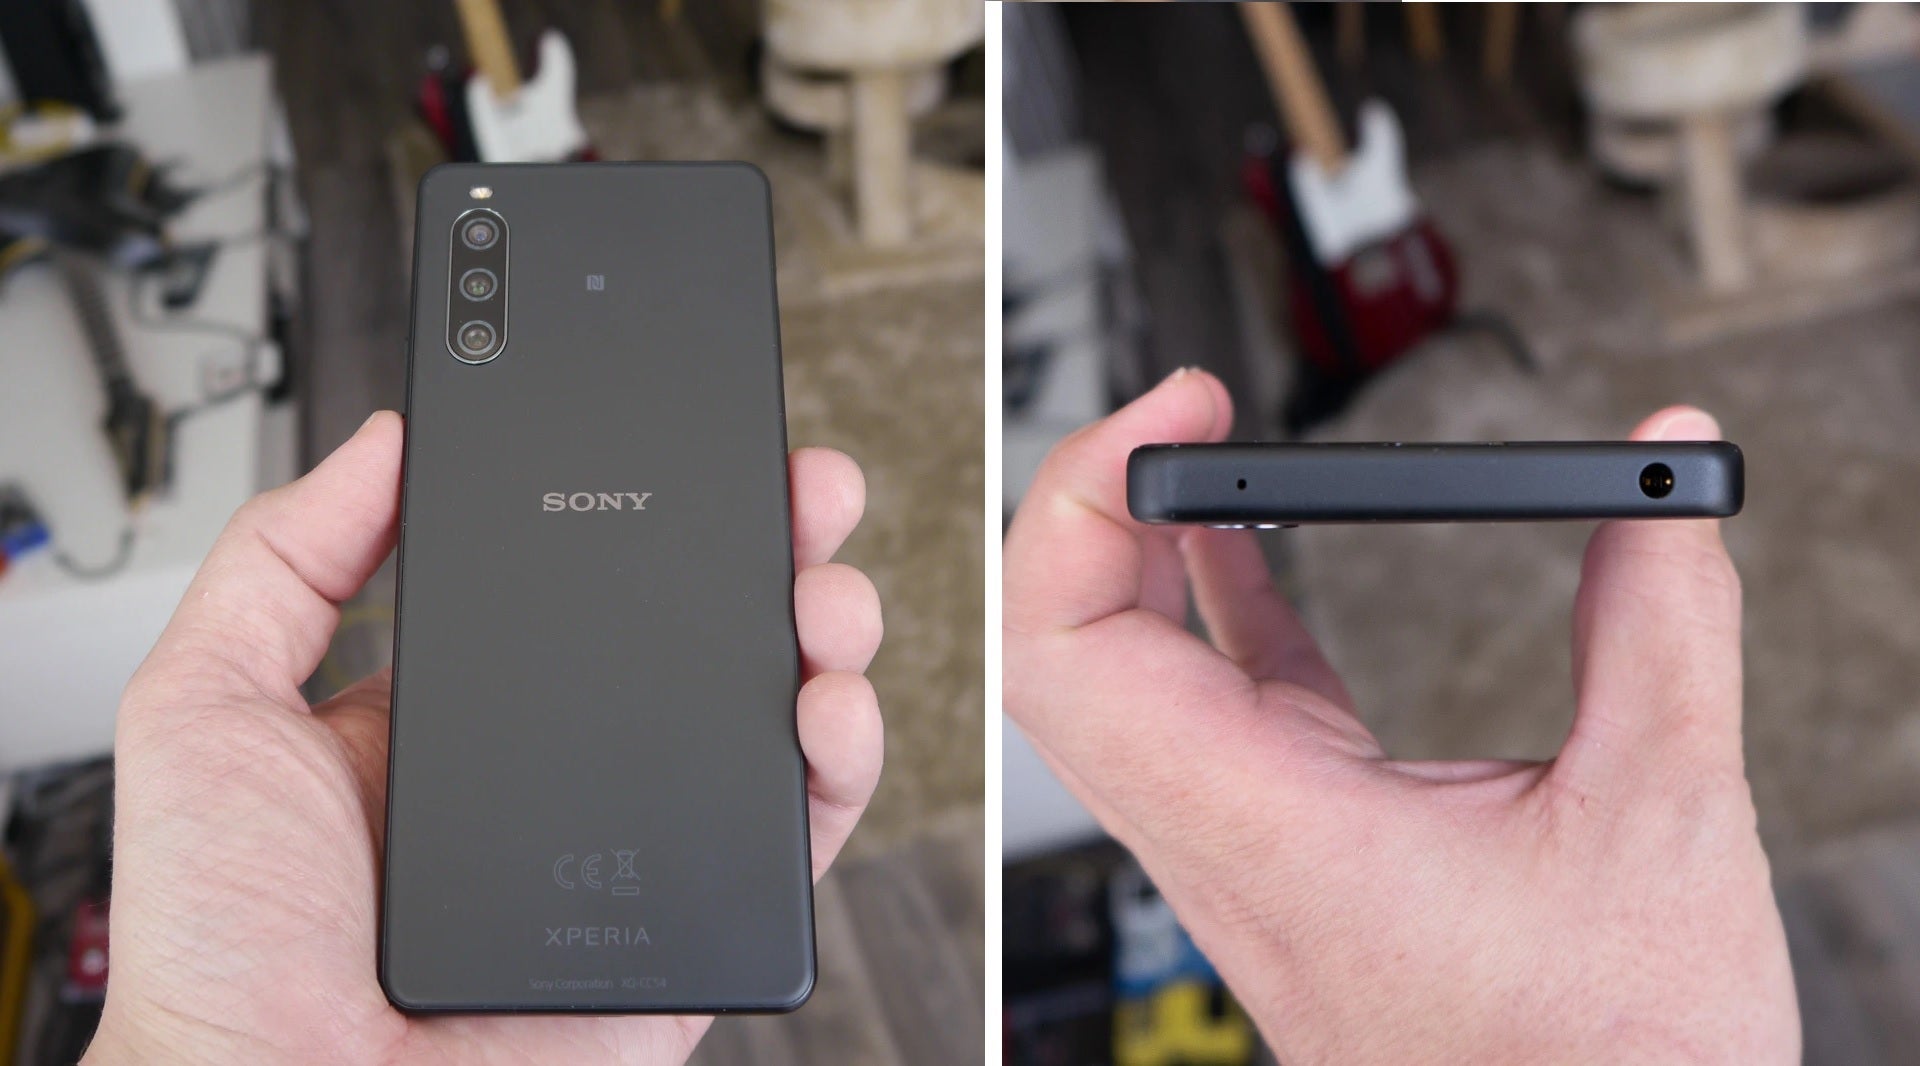 This new Sony Xperia isn't 